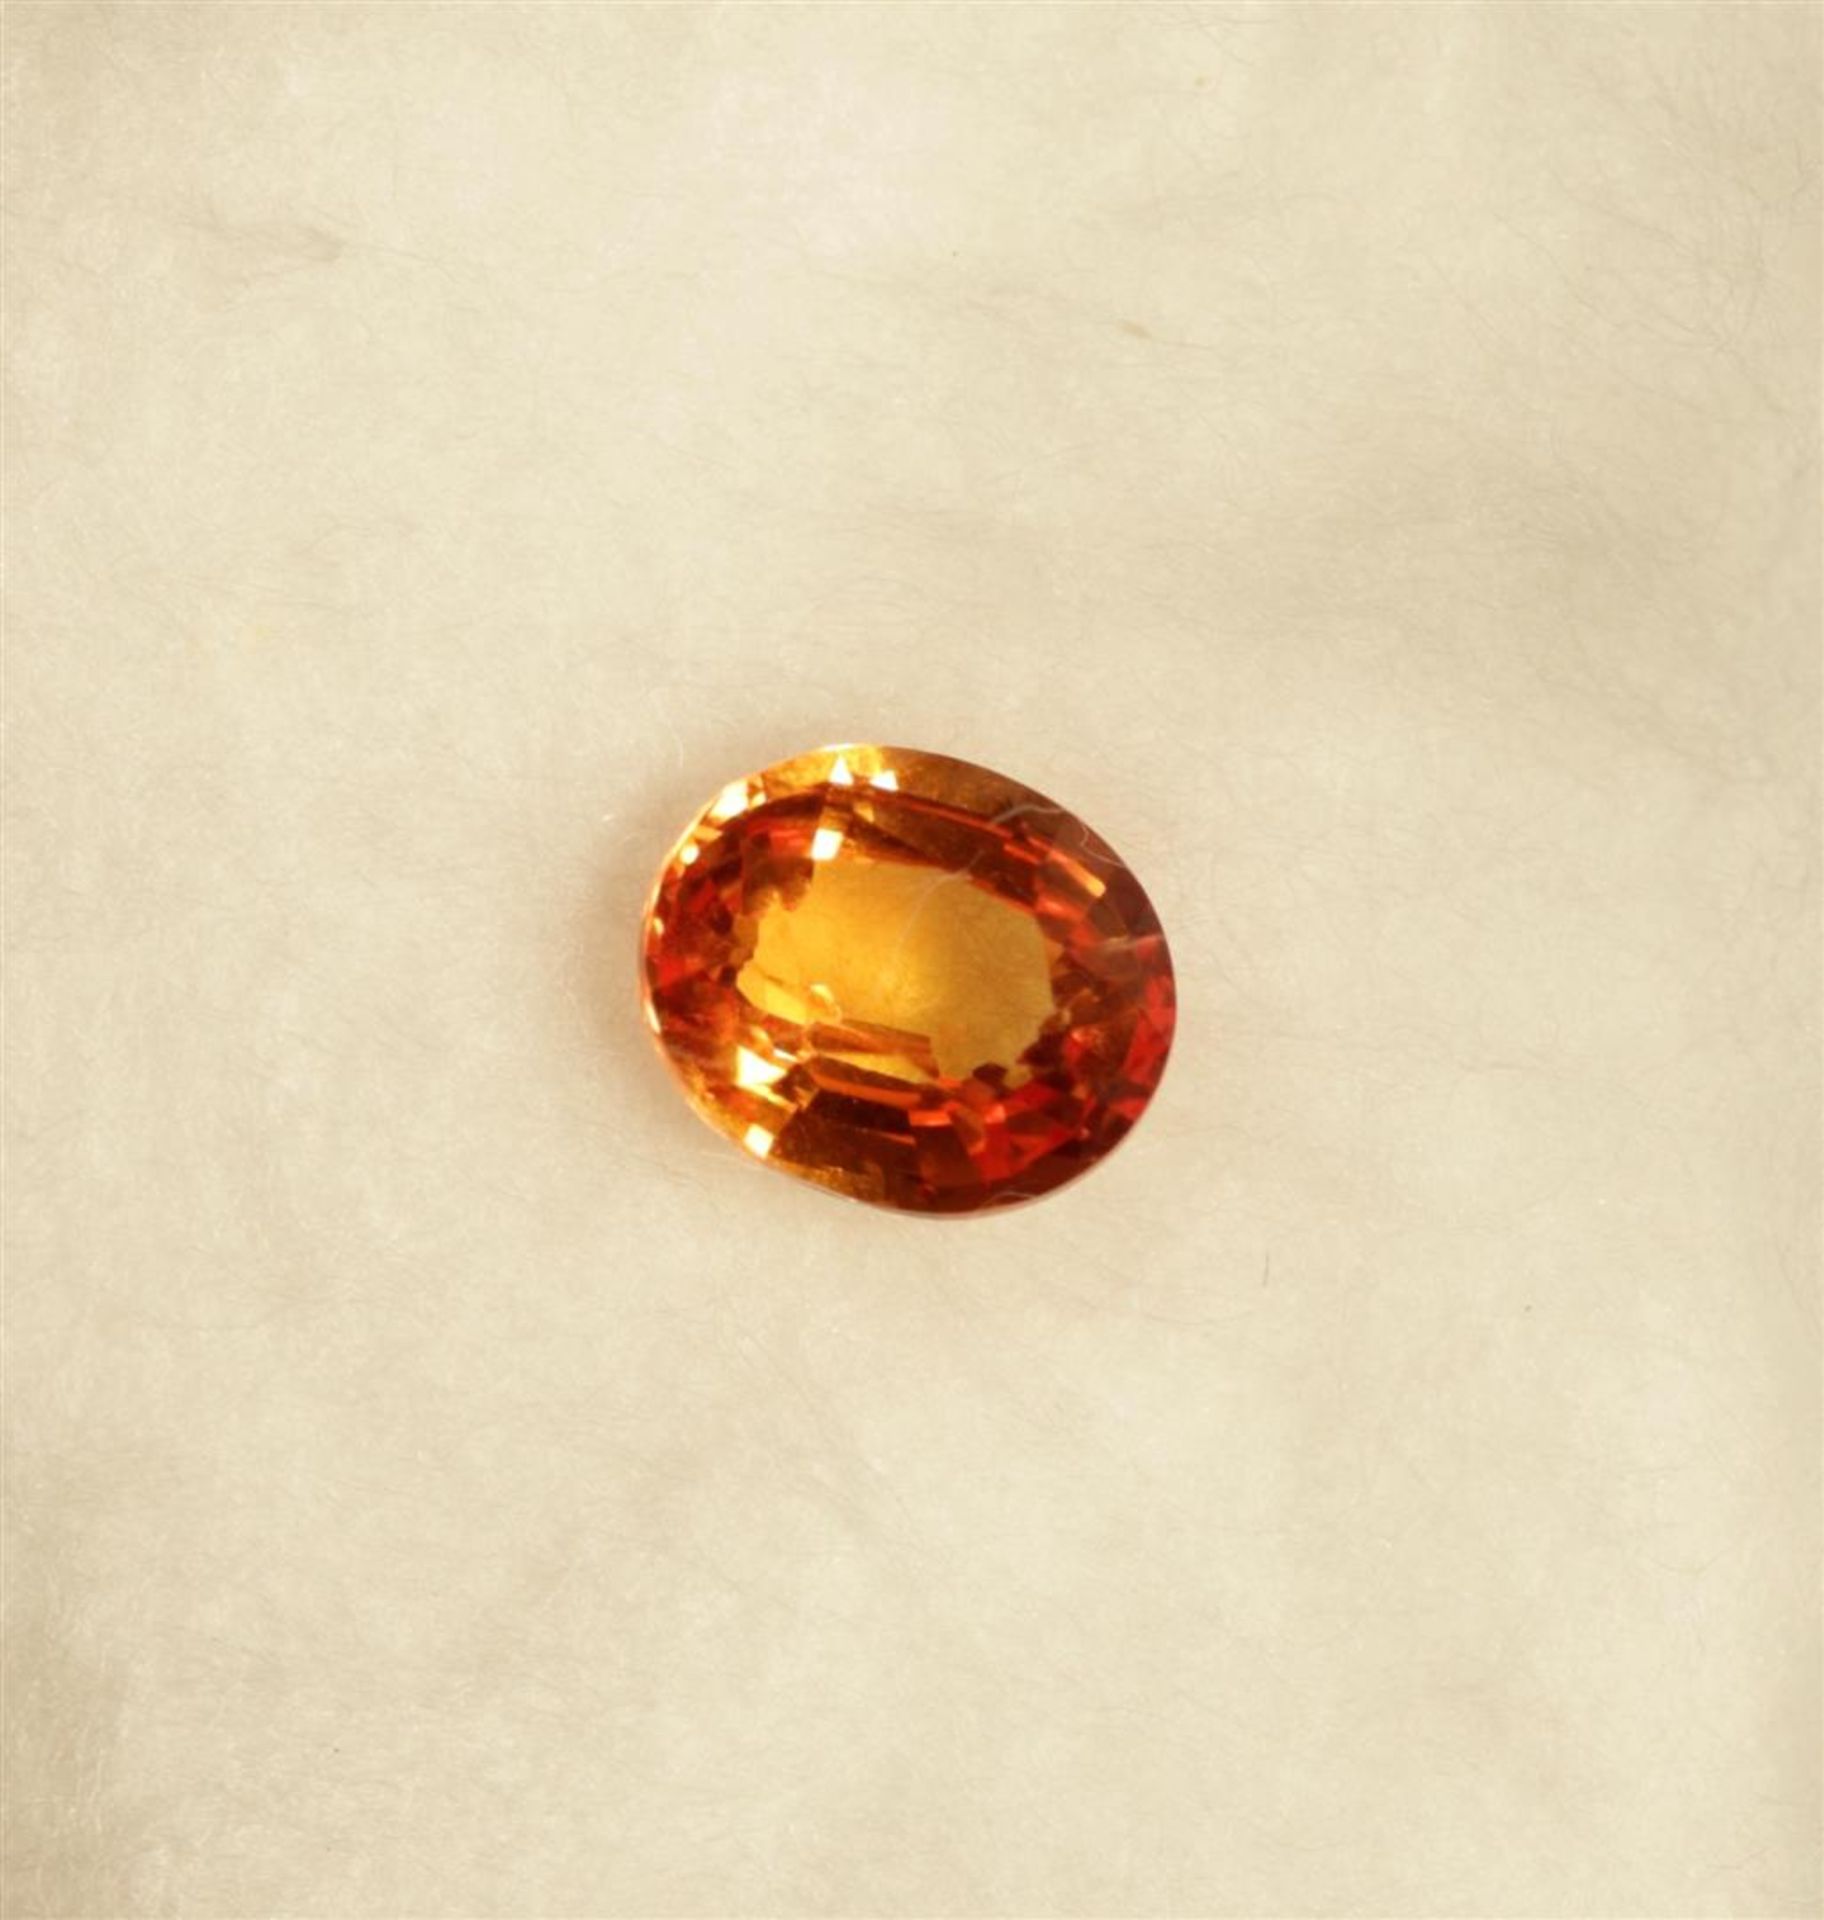 Orange sapphire 1.1ct.
This oval cut orange sapphire sparkles towards you. View our jewelry in the a